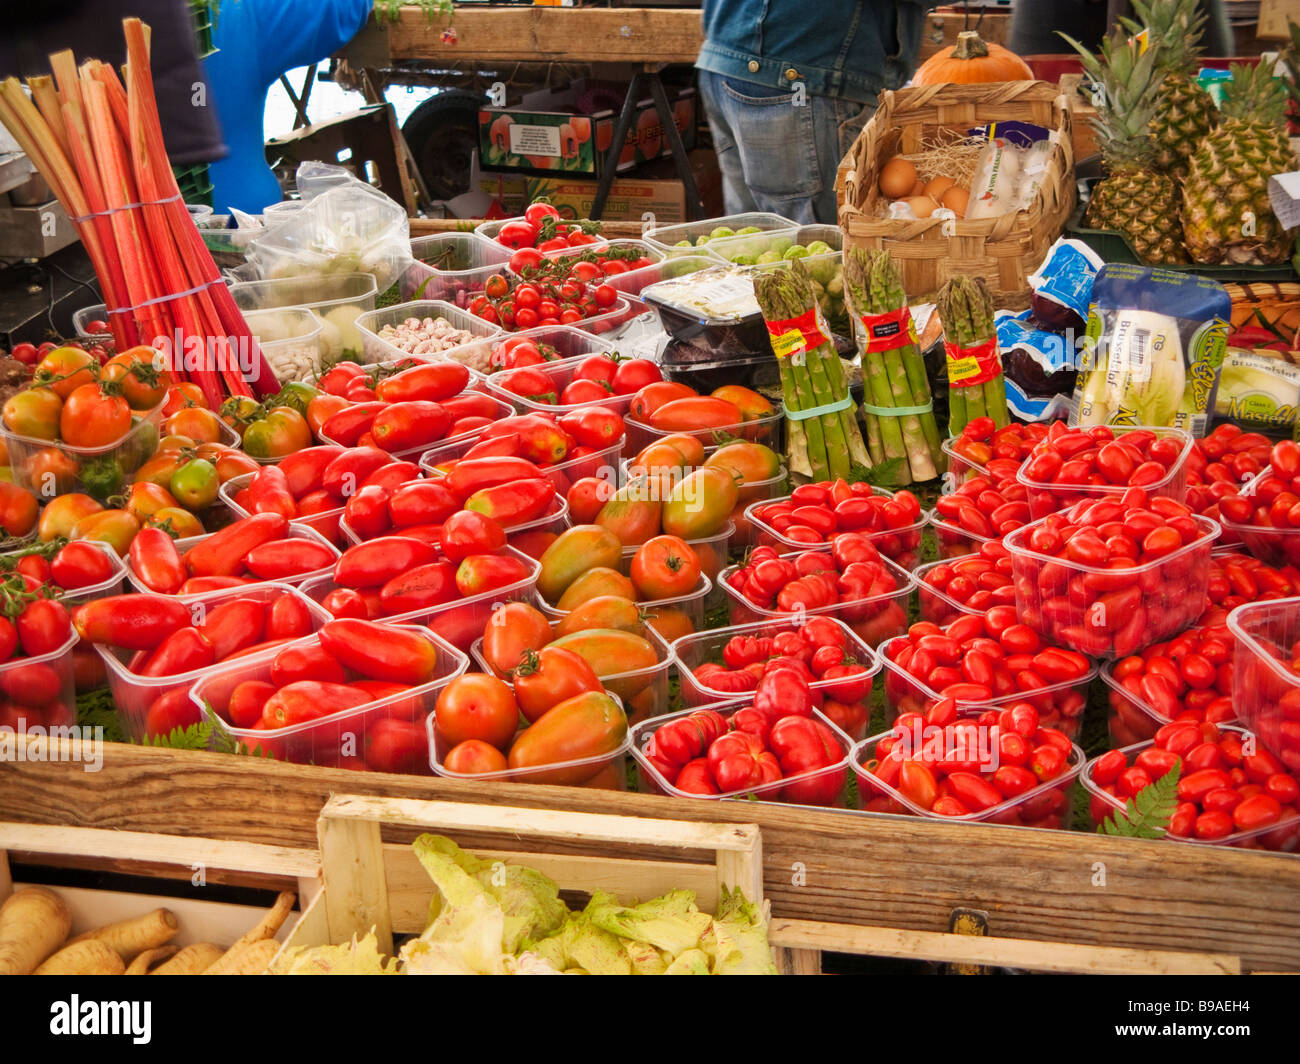 Italian market stall with a variety of tomatoes and other vegetables Stock Photo